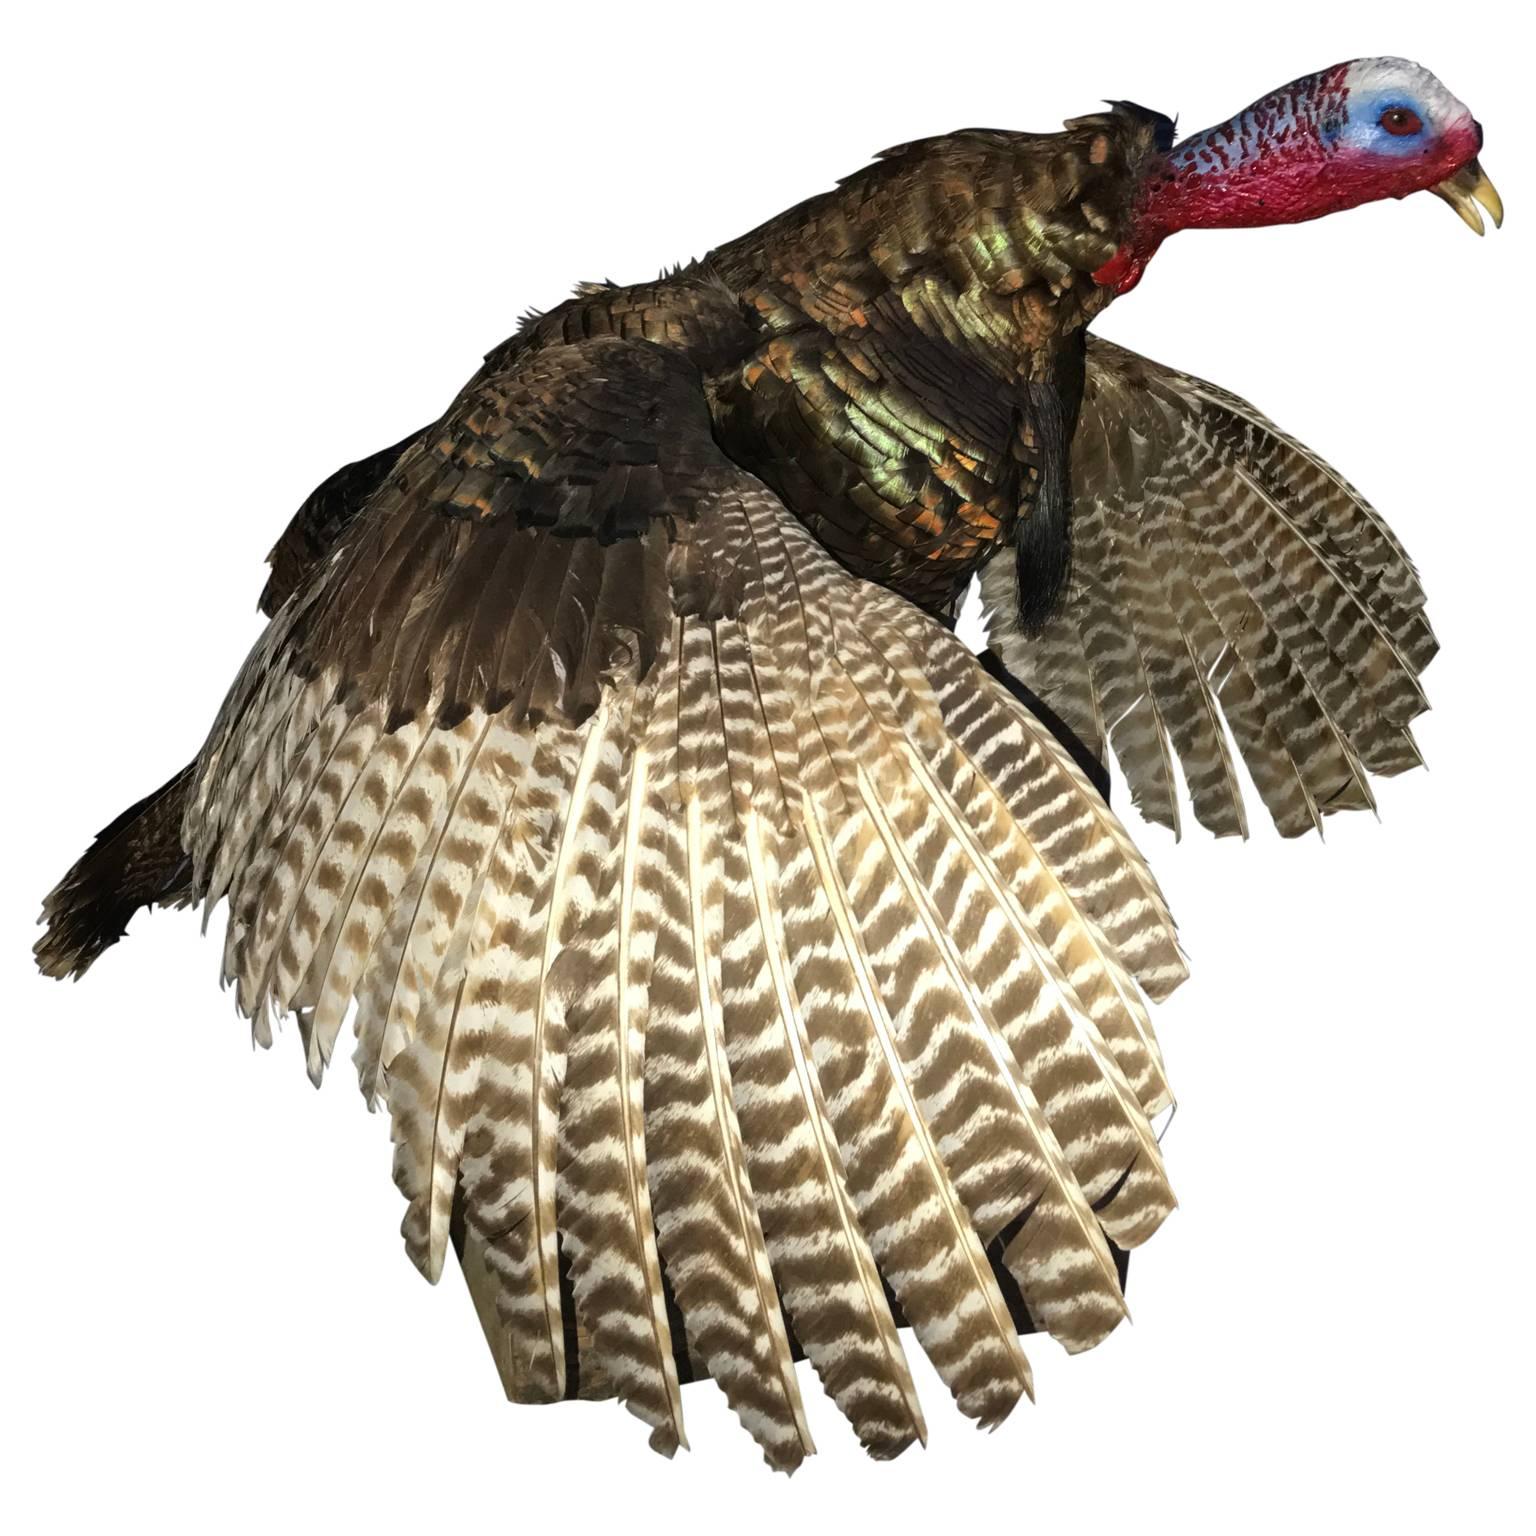 Large full mount taxidermic Turkey specimen, mounted on a wooden base.

$125 flat rate front door delivery includes Washington DC metro, Baltimore and Philadelphia.